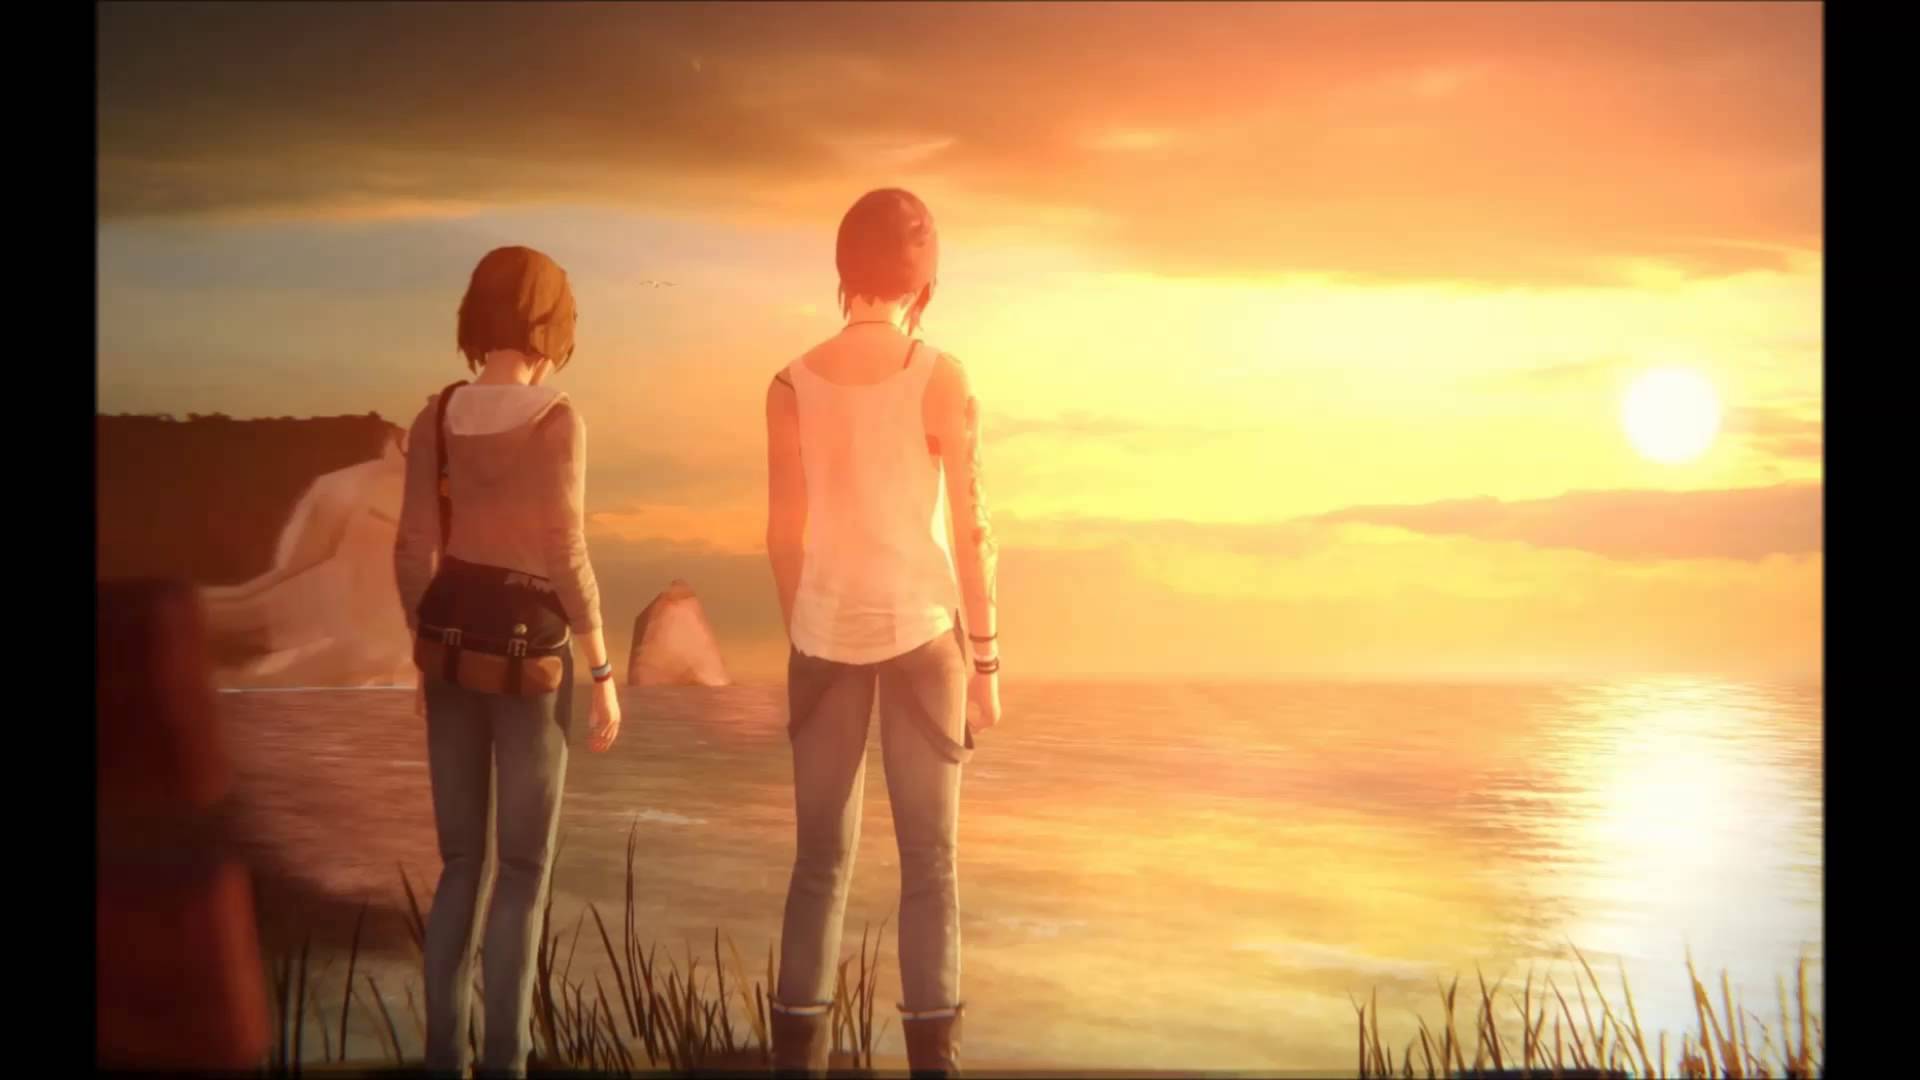 The Future of the Life is Strange Franchise Explored